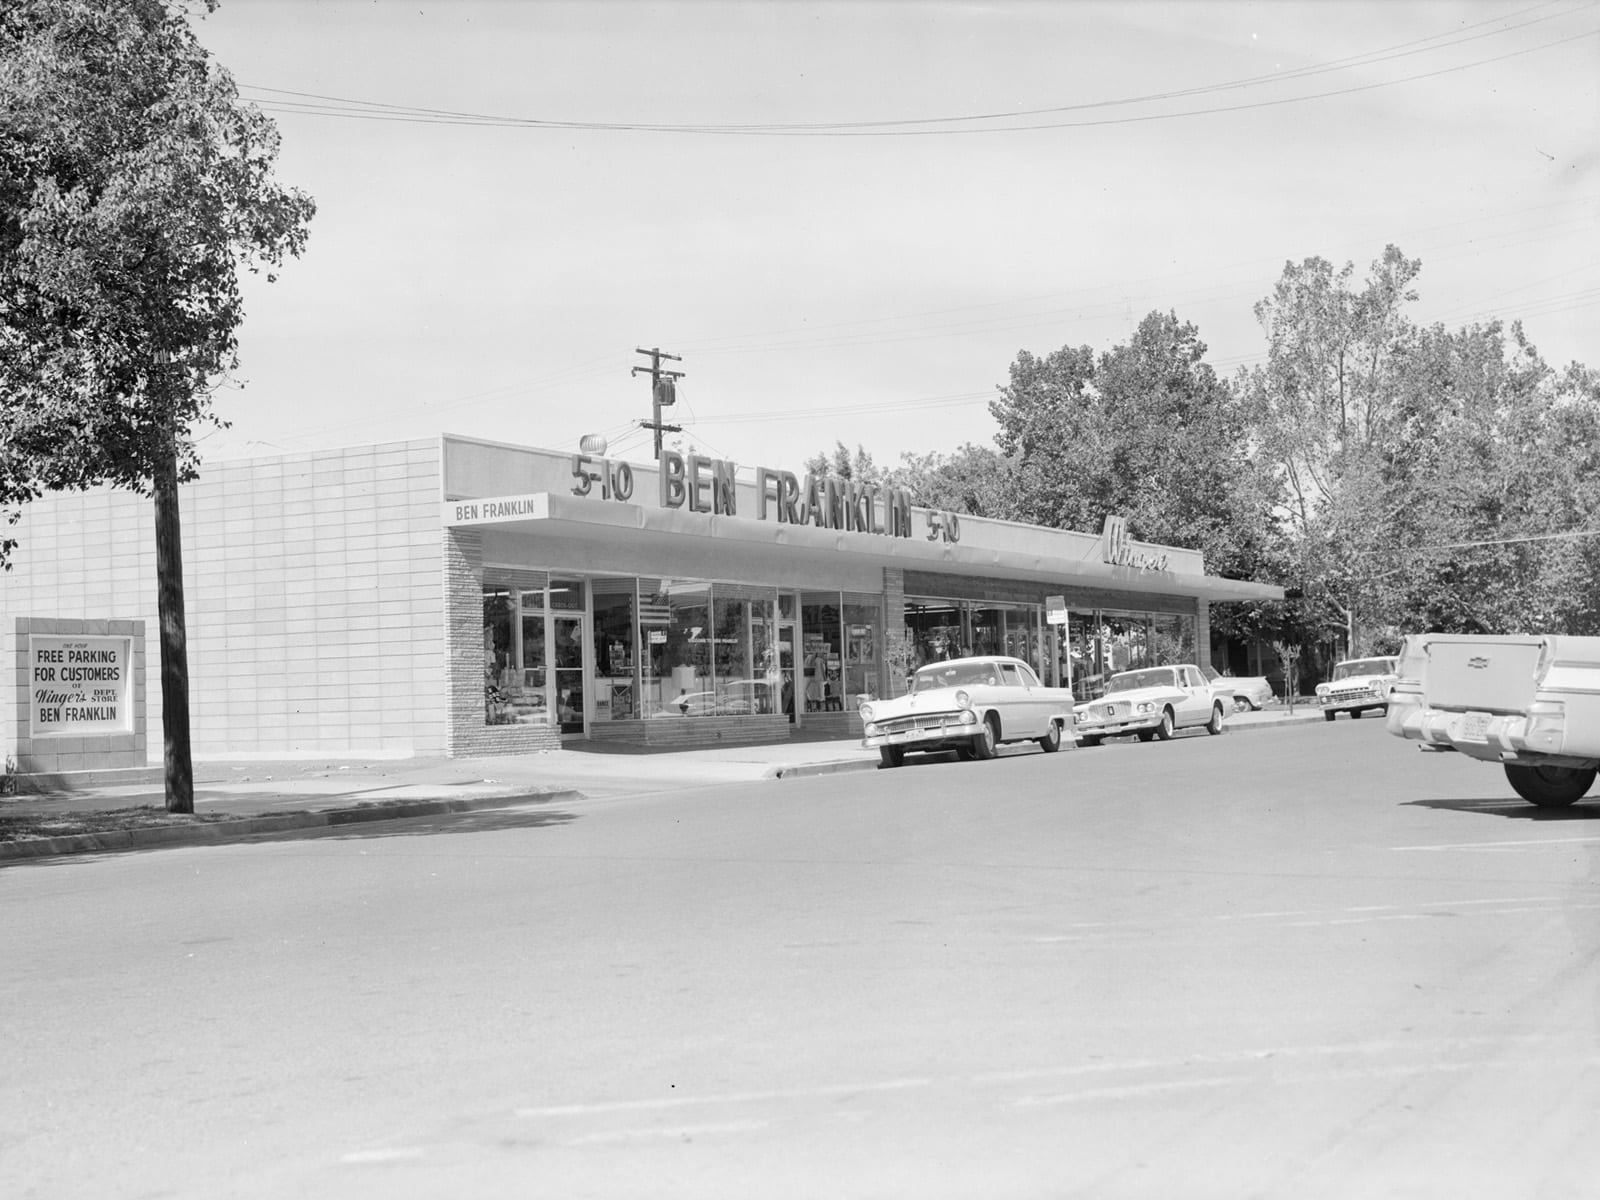 F Street between Second and Third Streets, looking northwest, 1957